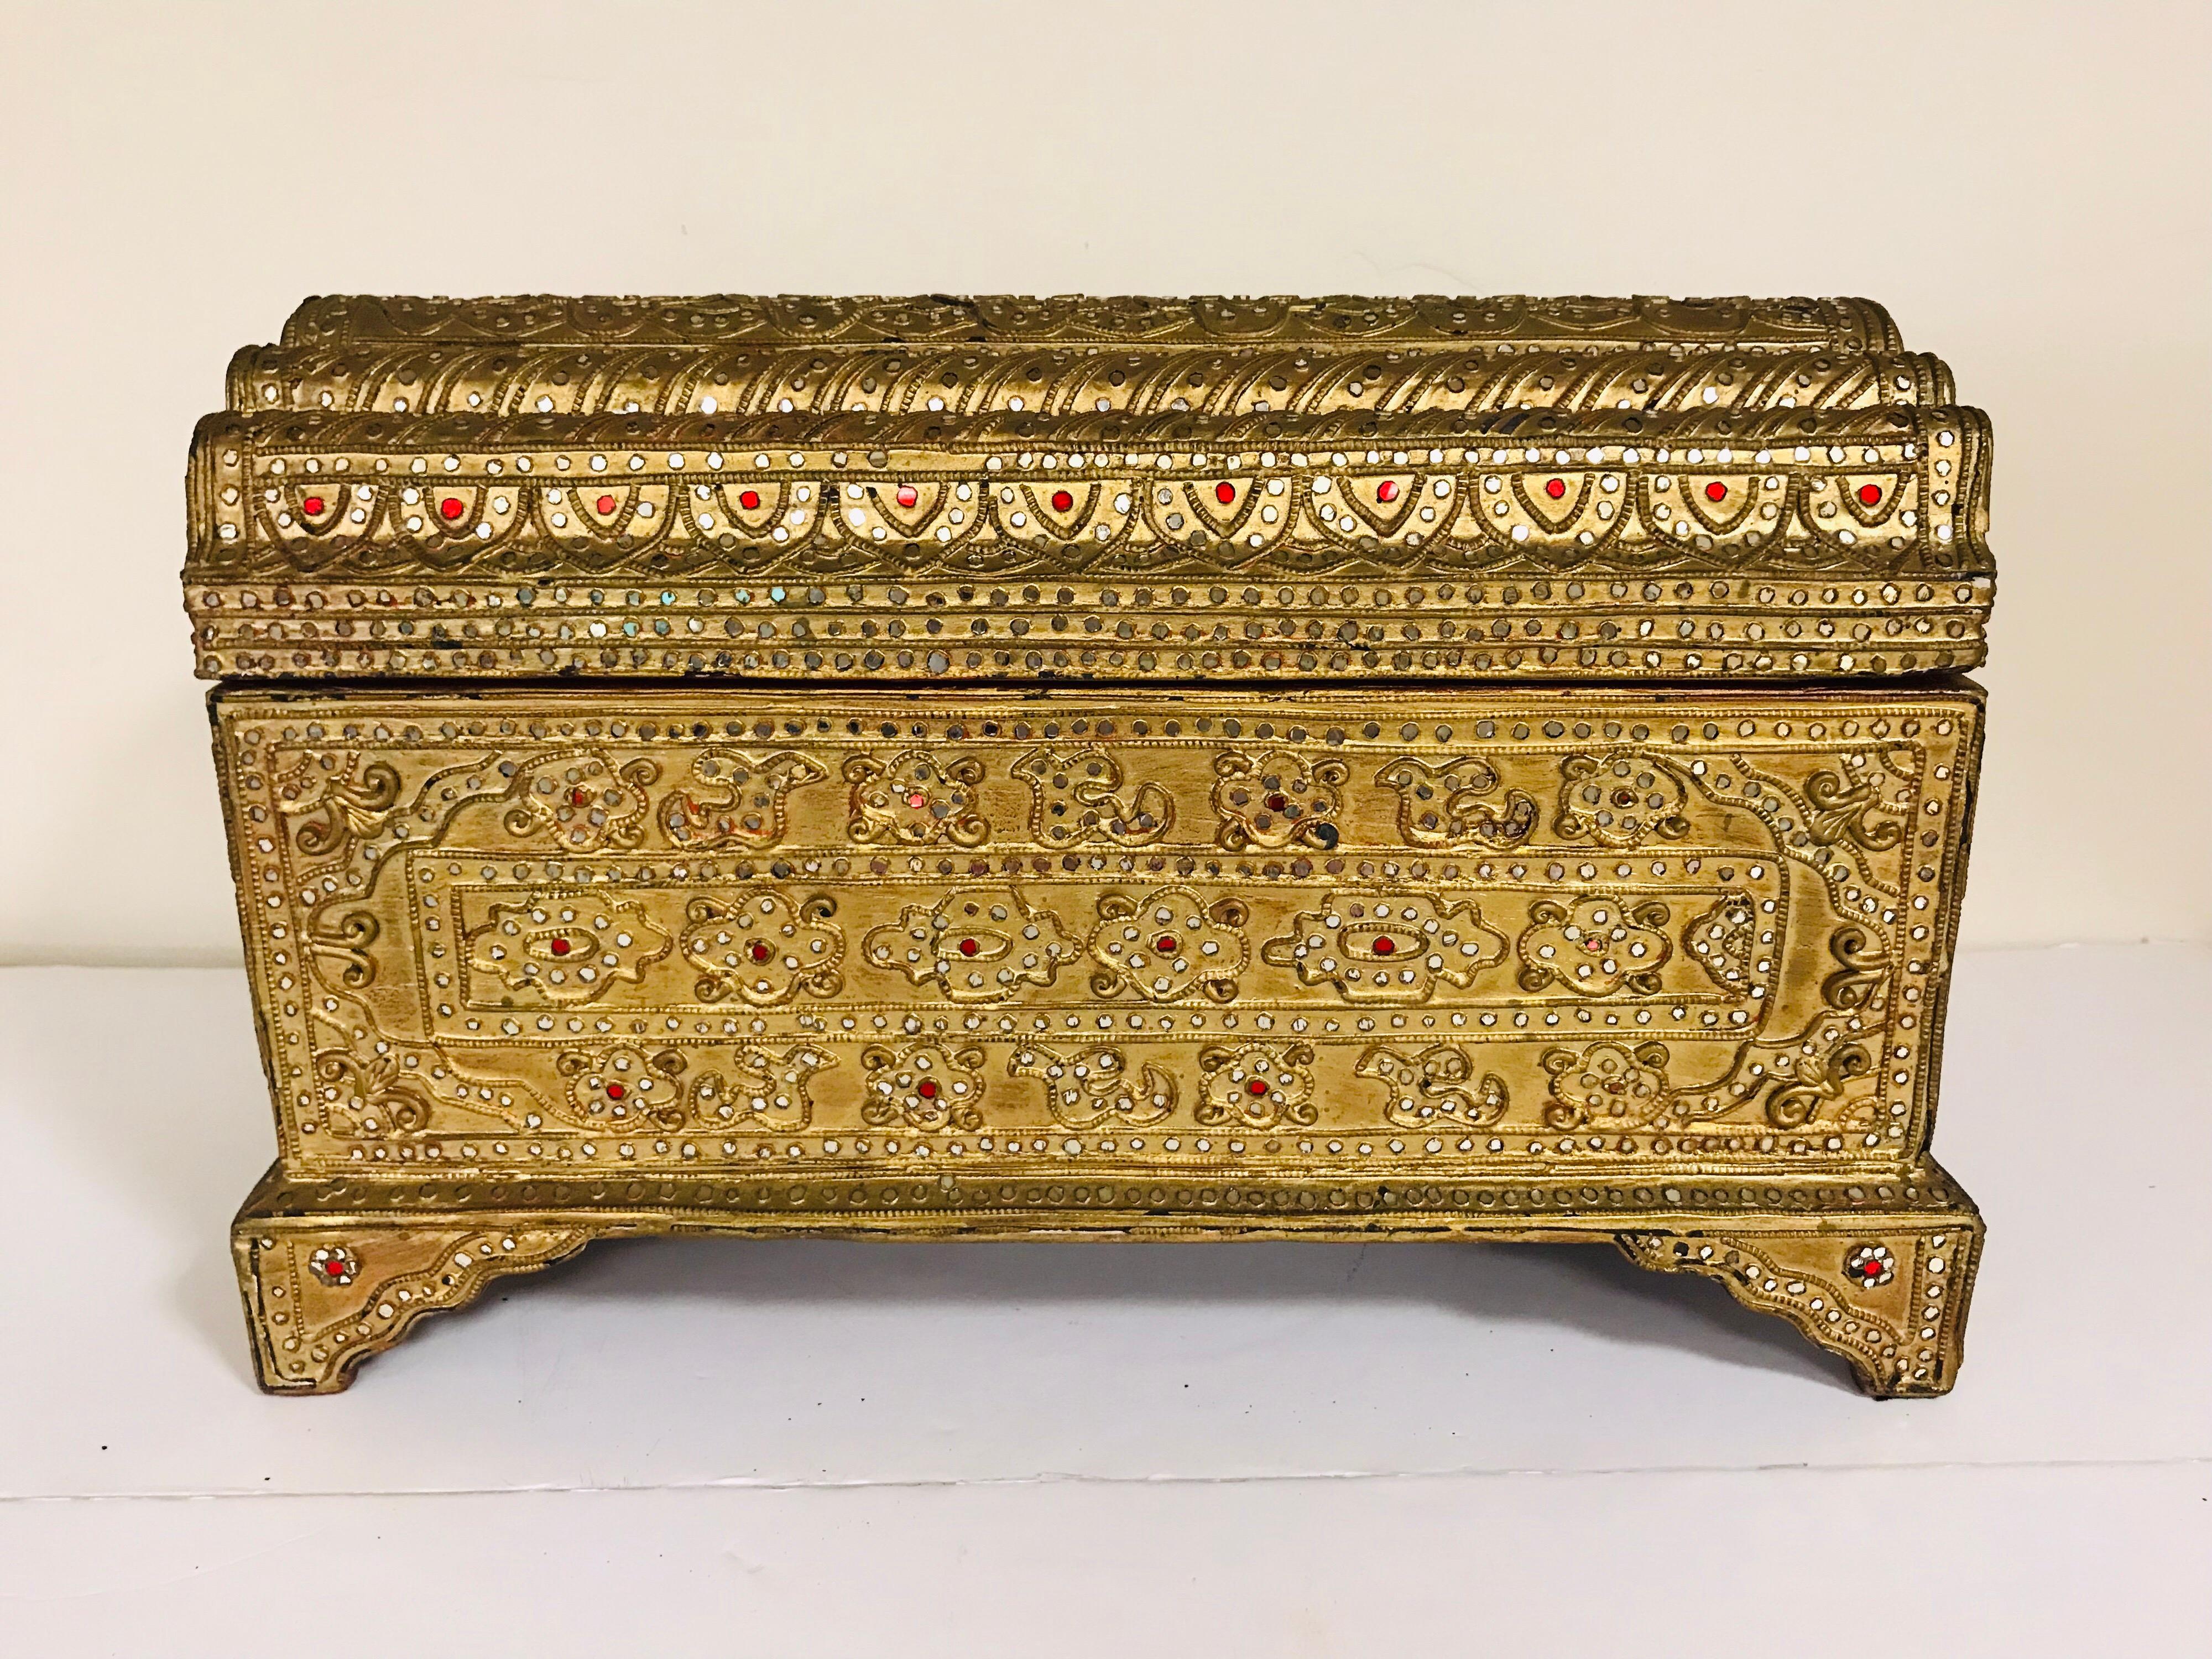 Stunning giltwood jeweled box for your valuables or just a gorgeous decorative piece.